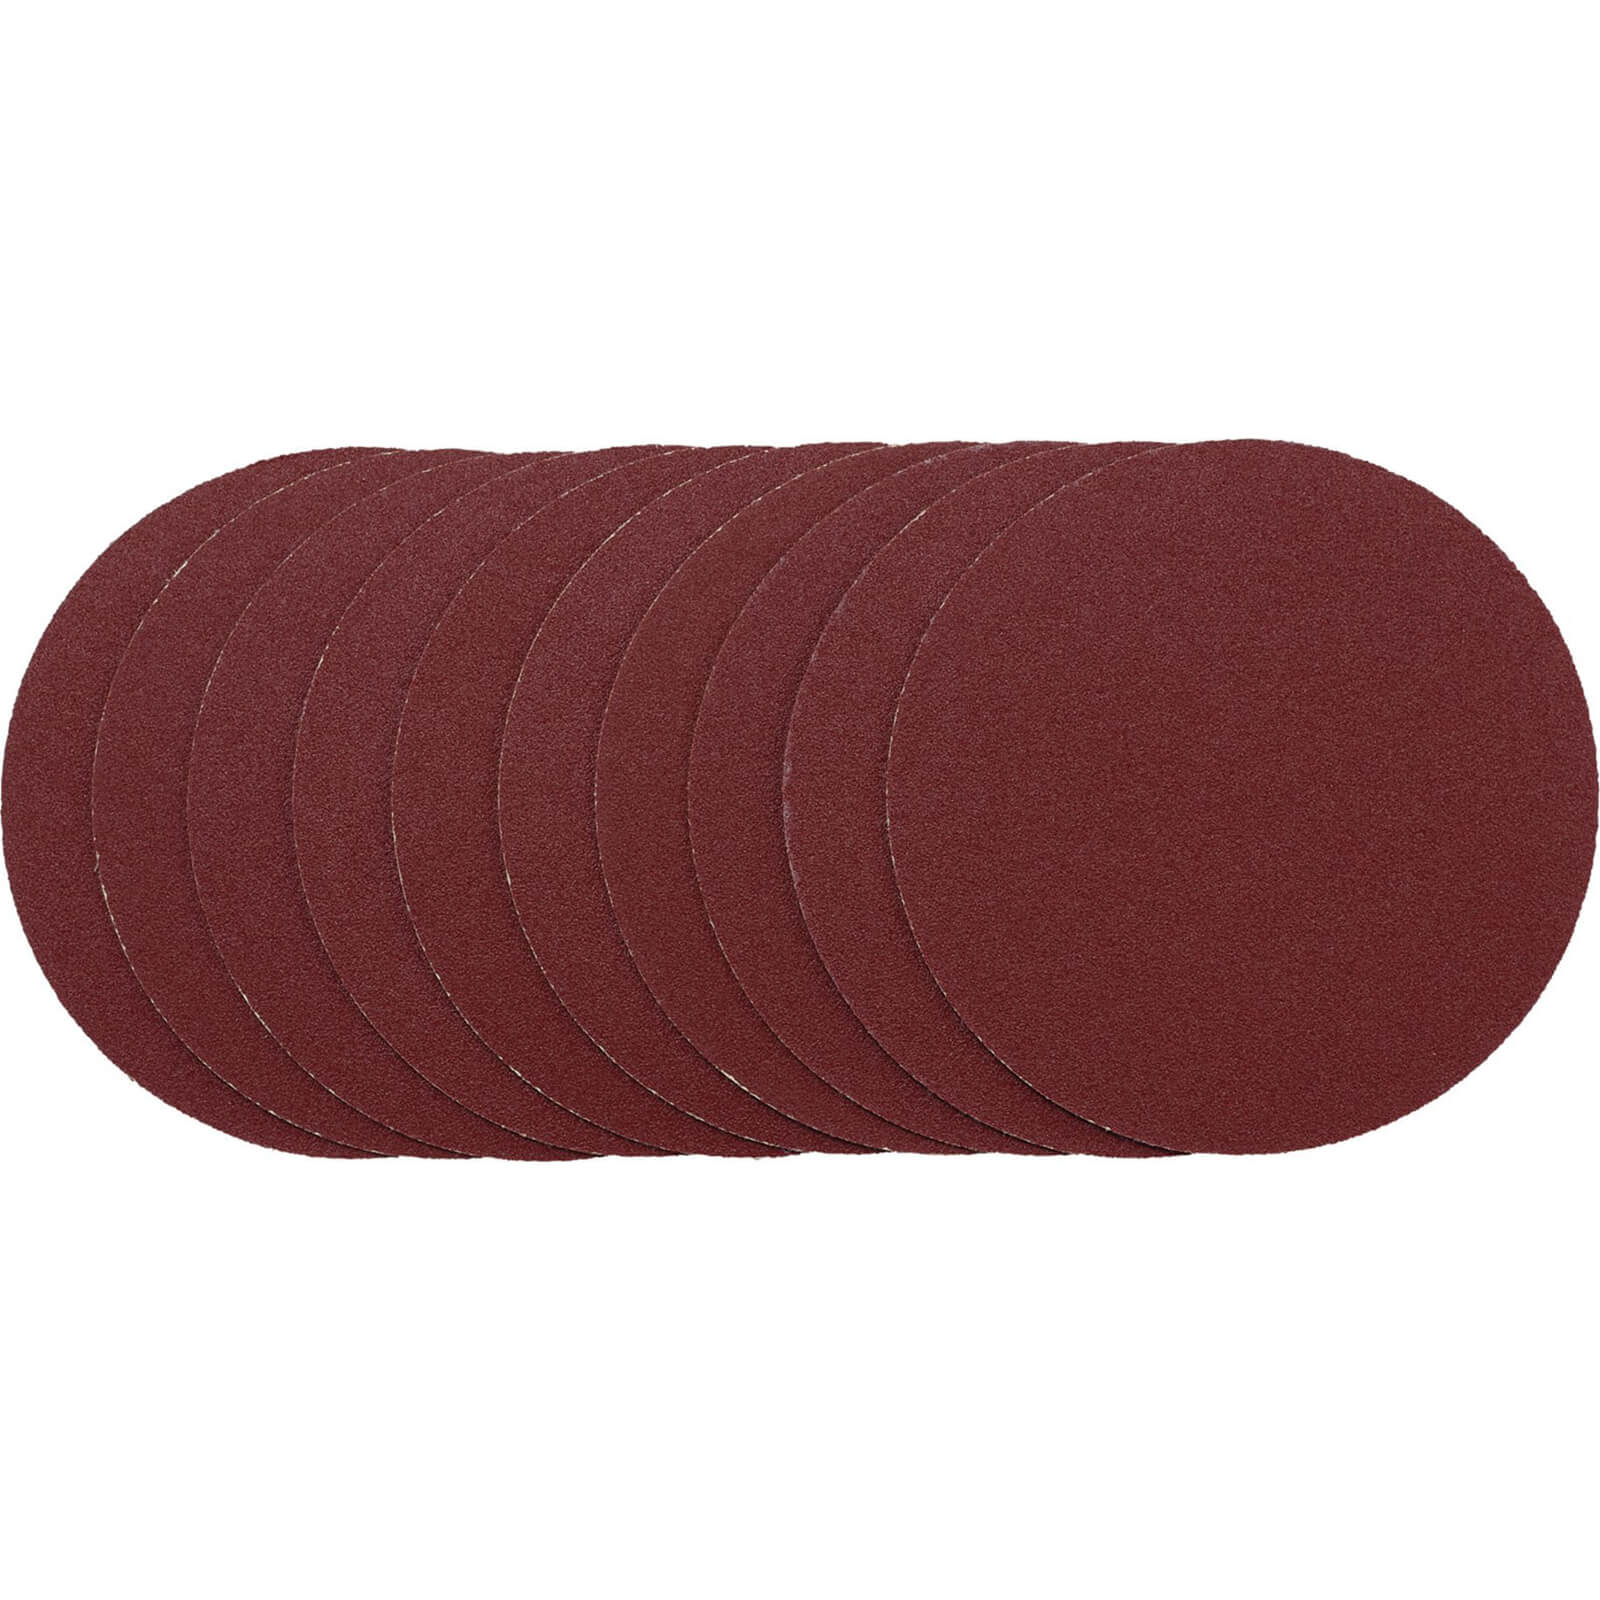 Image of Draper Unpunched Hook and Loop Sanding Discs 125mm 125mm 120g Pack of 10